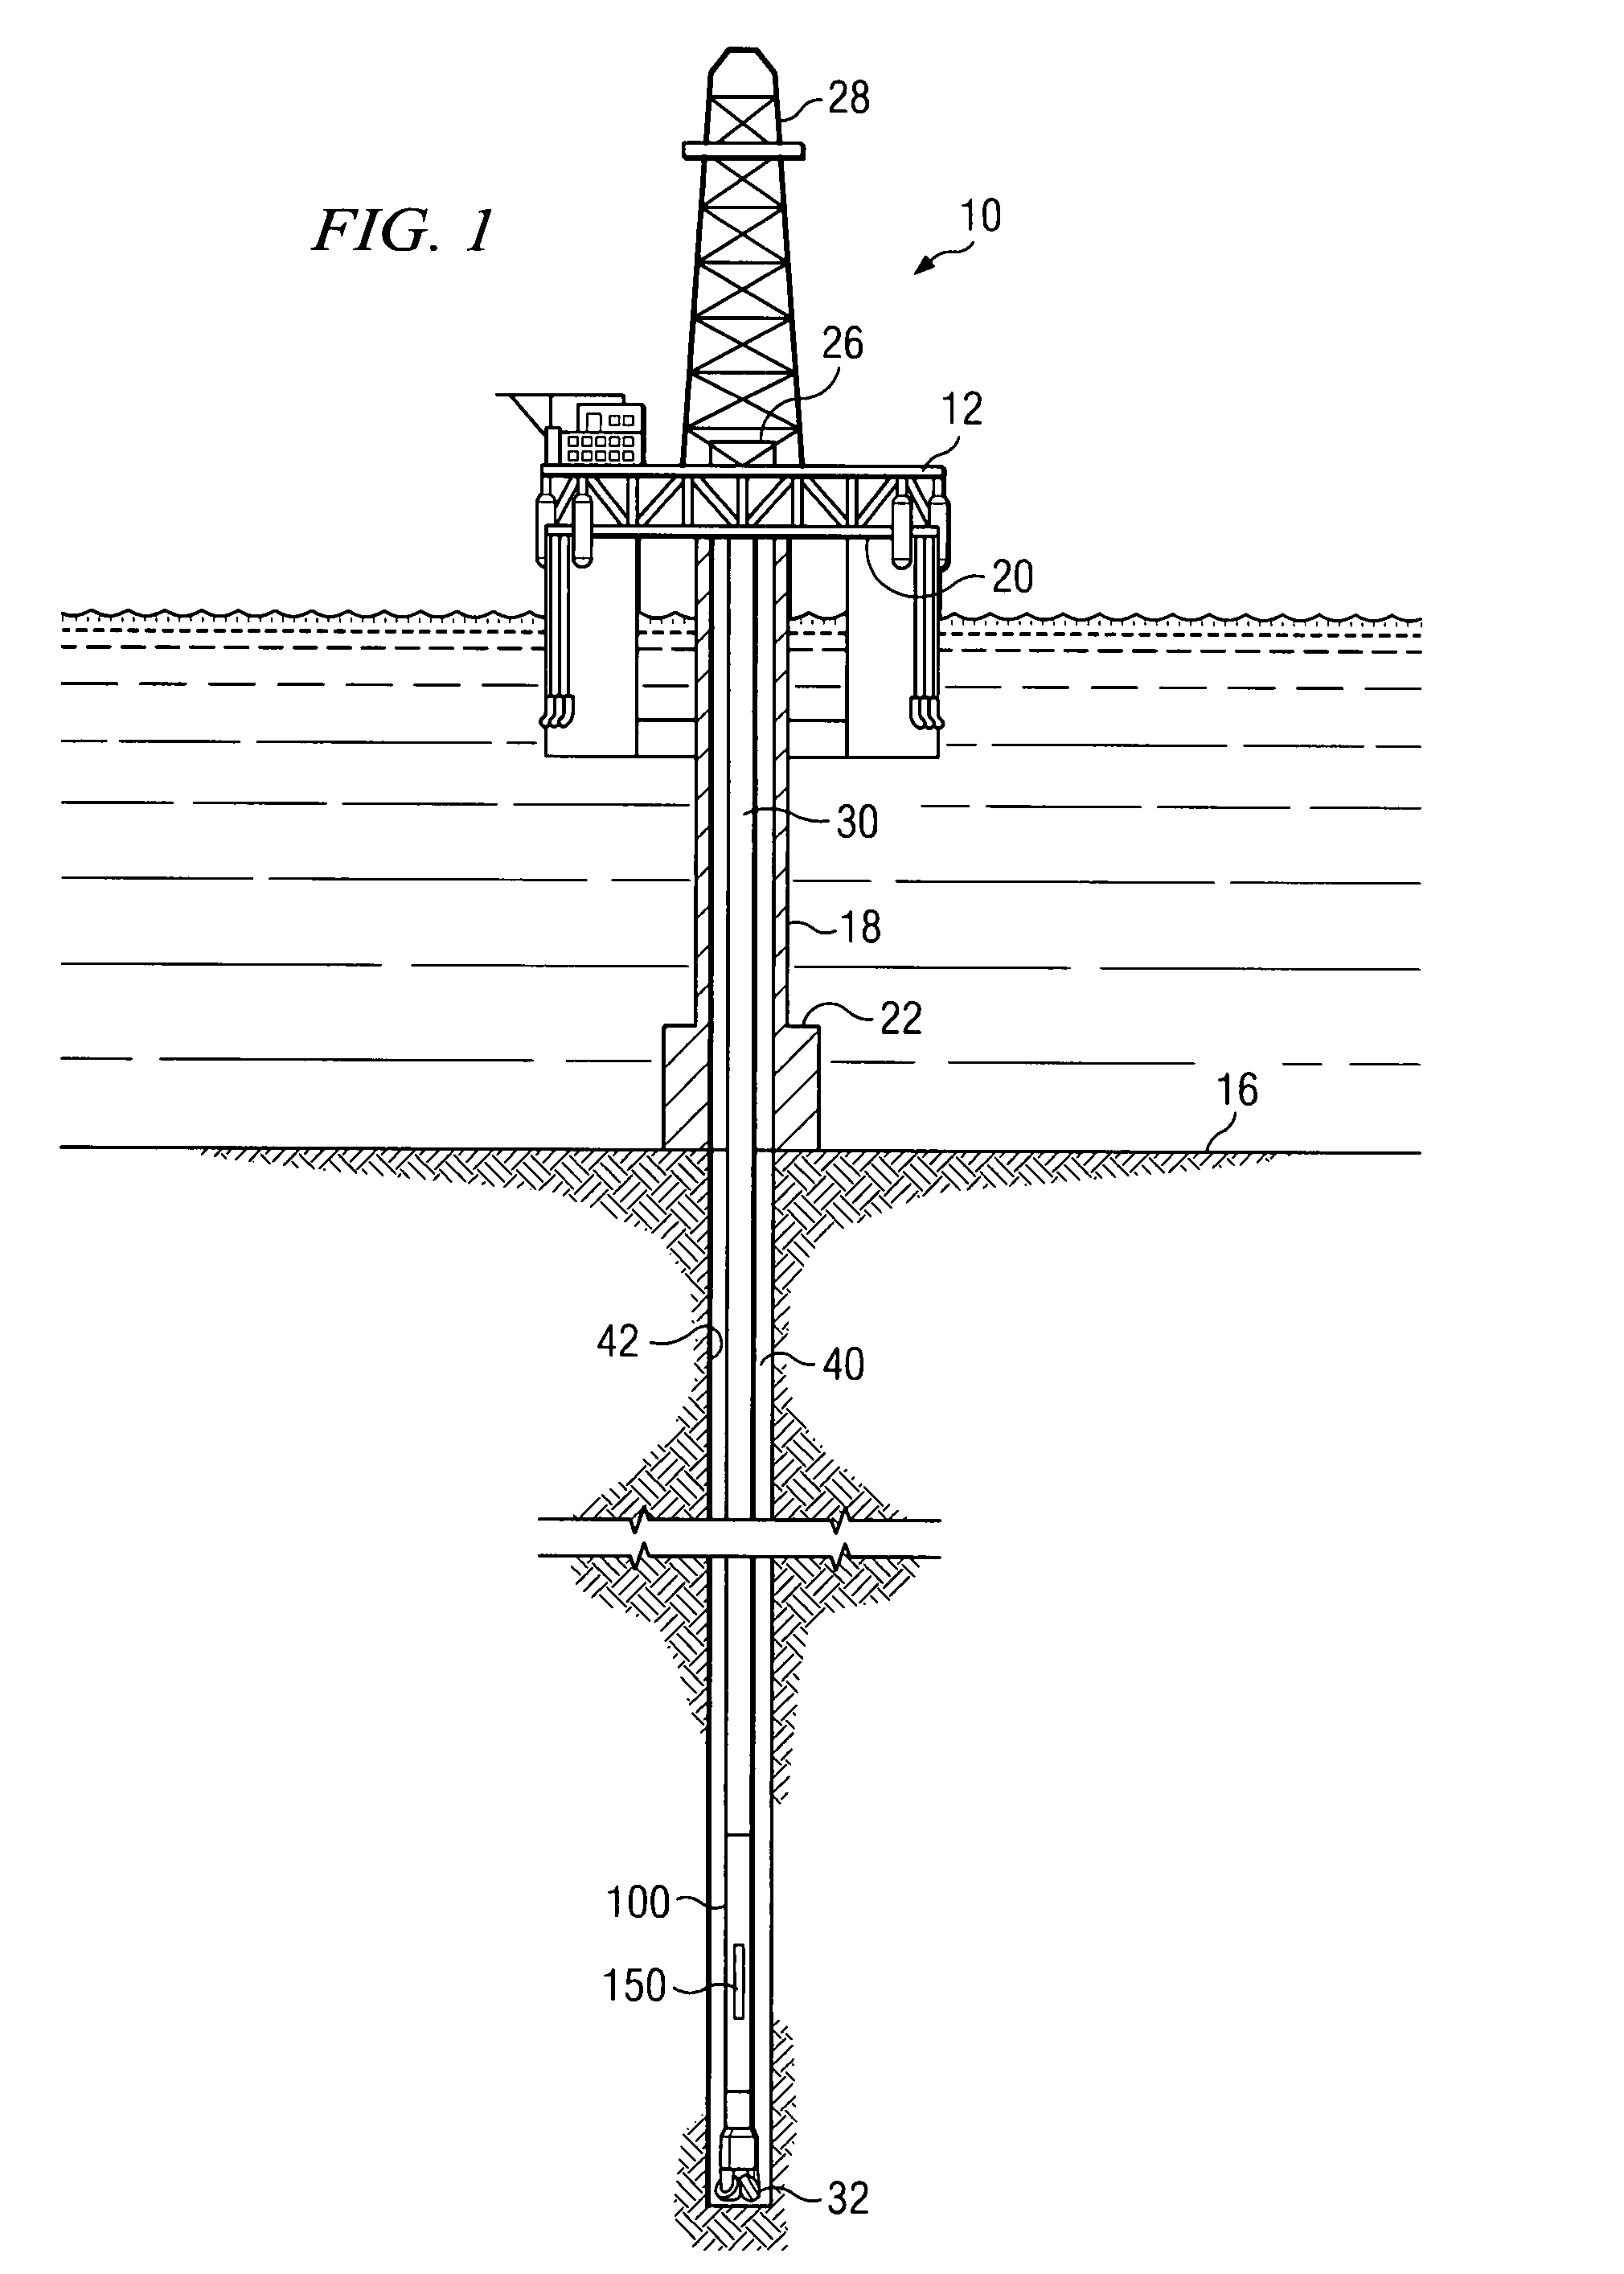 Non-contact capacitive datalink for a downhole assembly